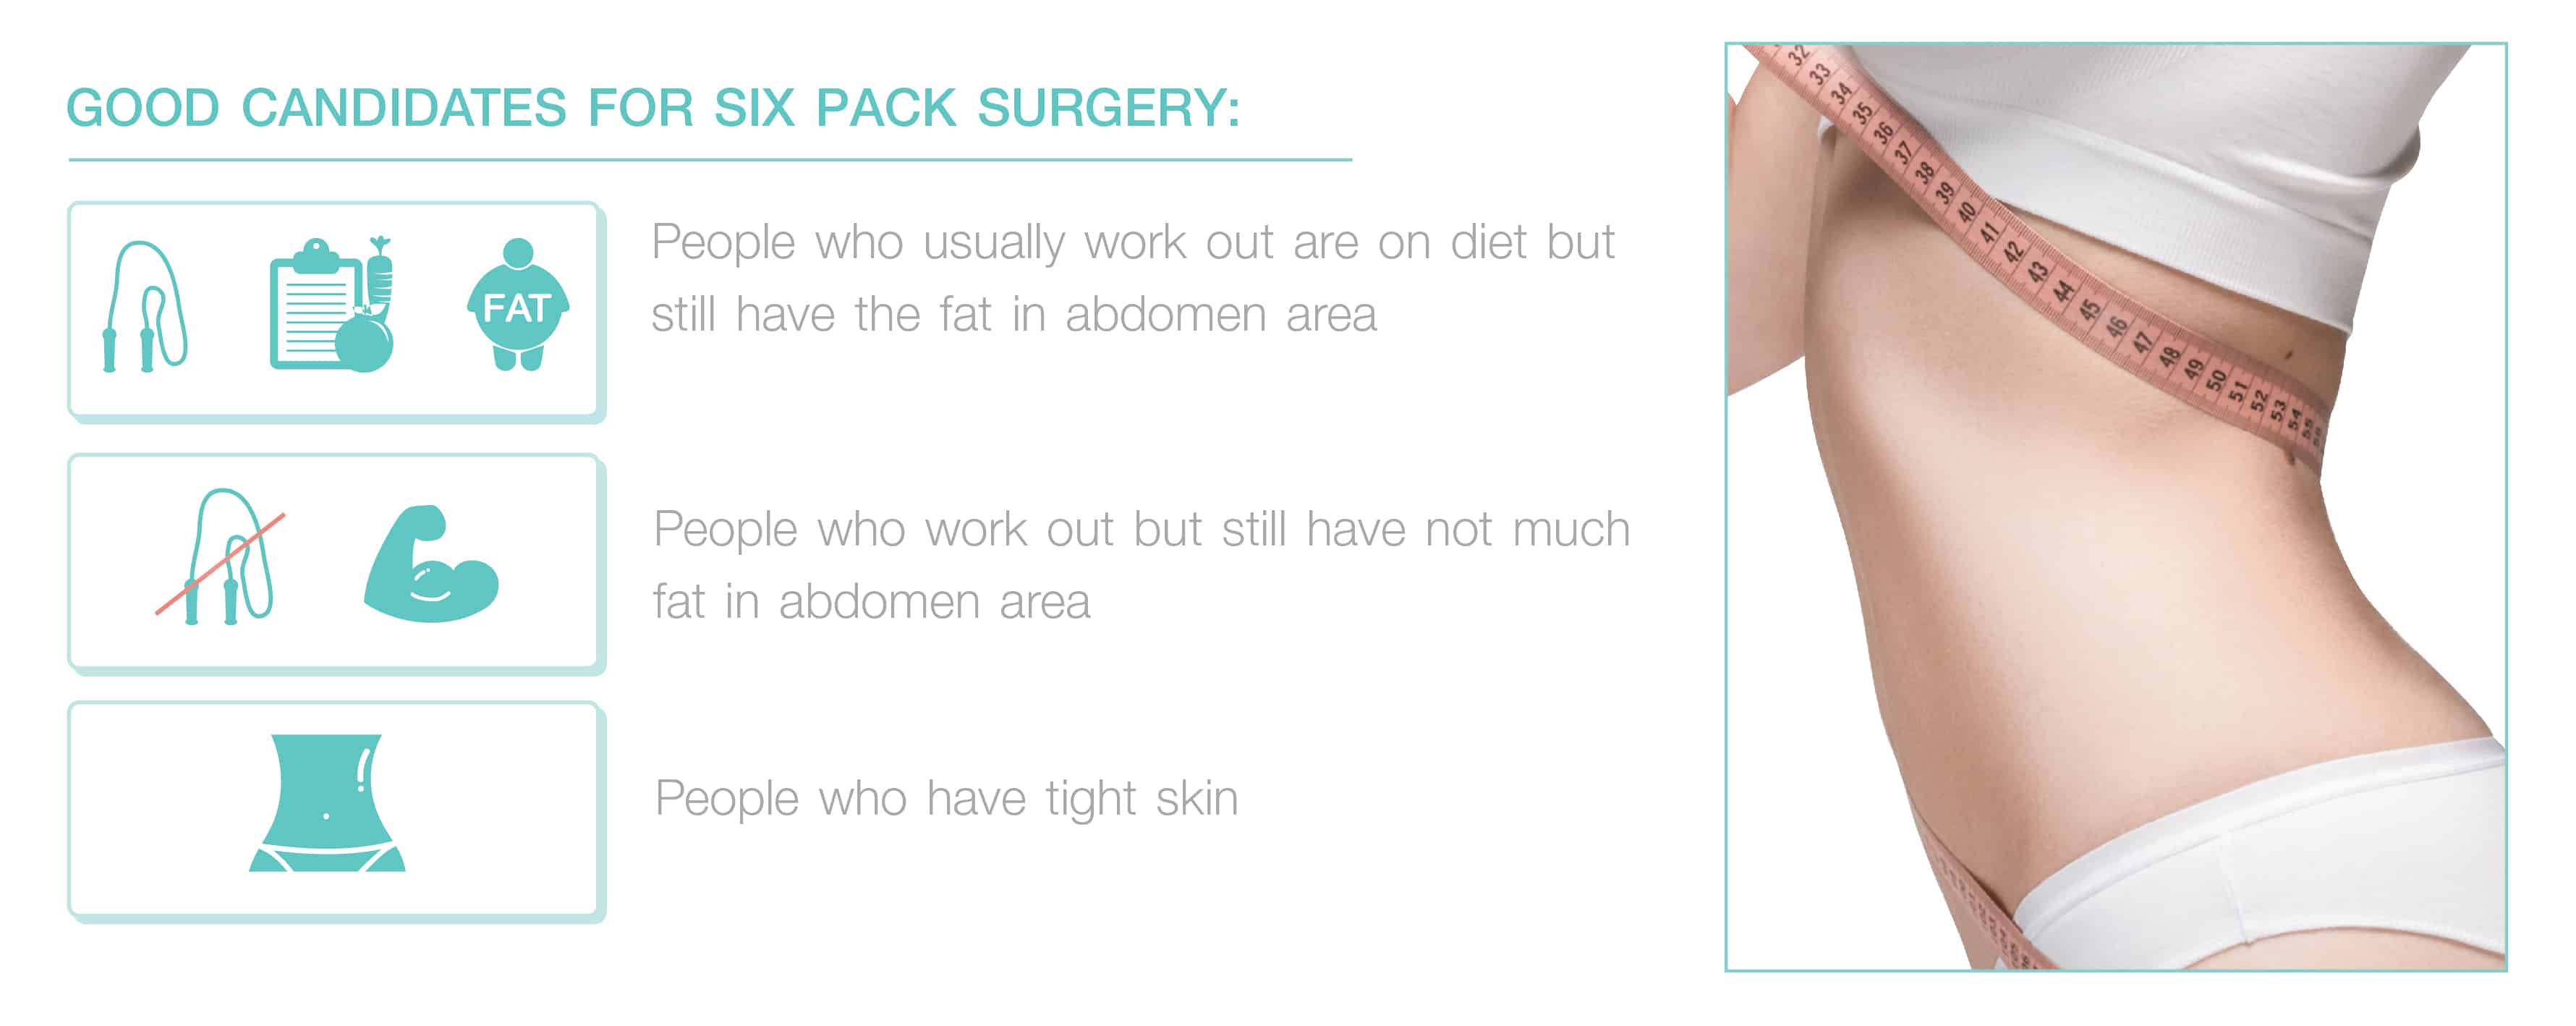 Good candidates for six pack surgery: